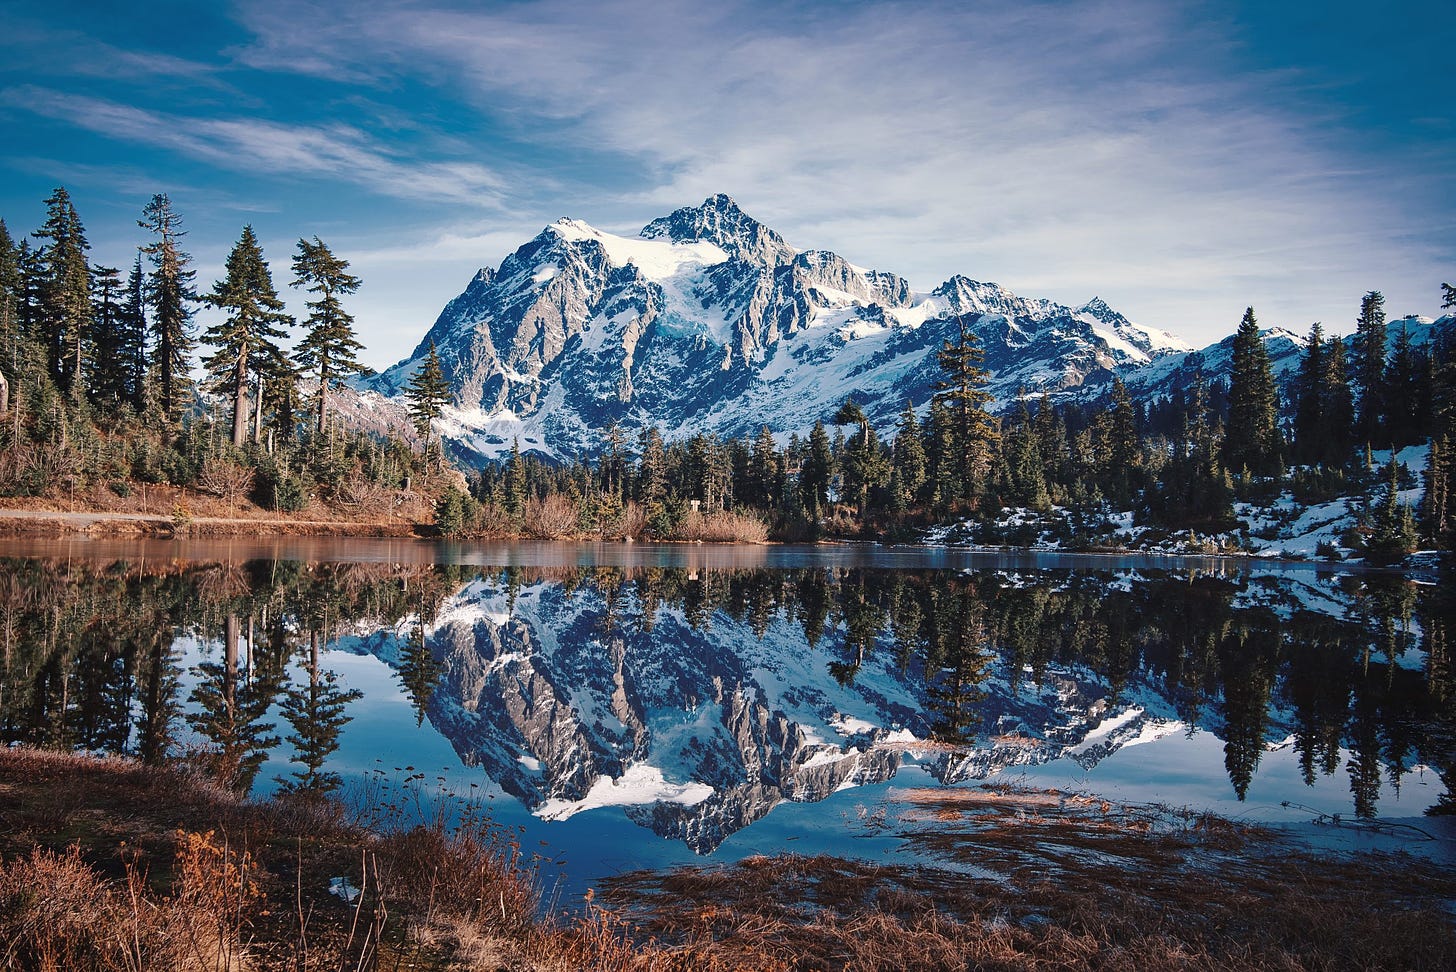 Picture lake with perfect reflection of Mt Shuksan in it